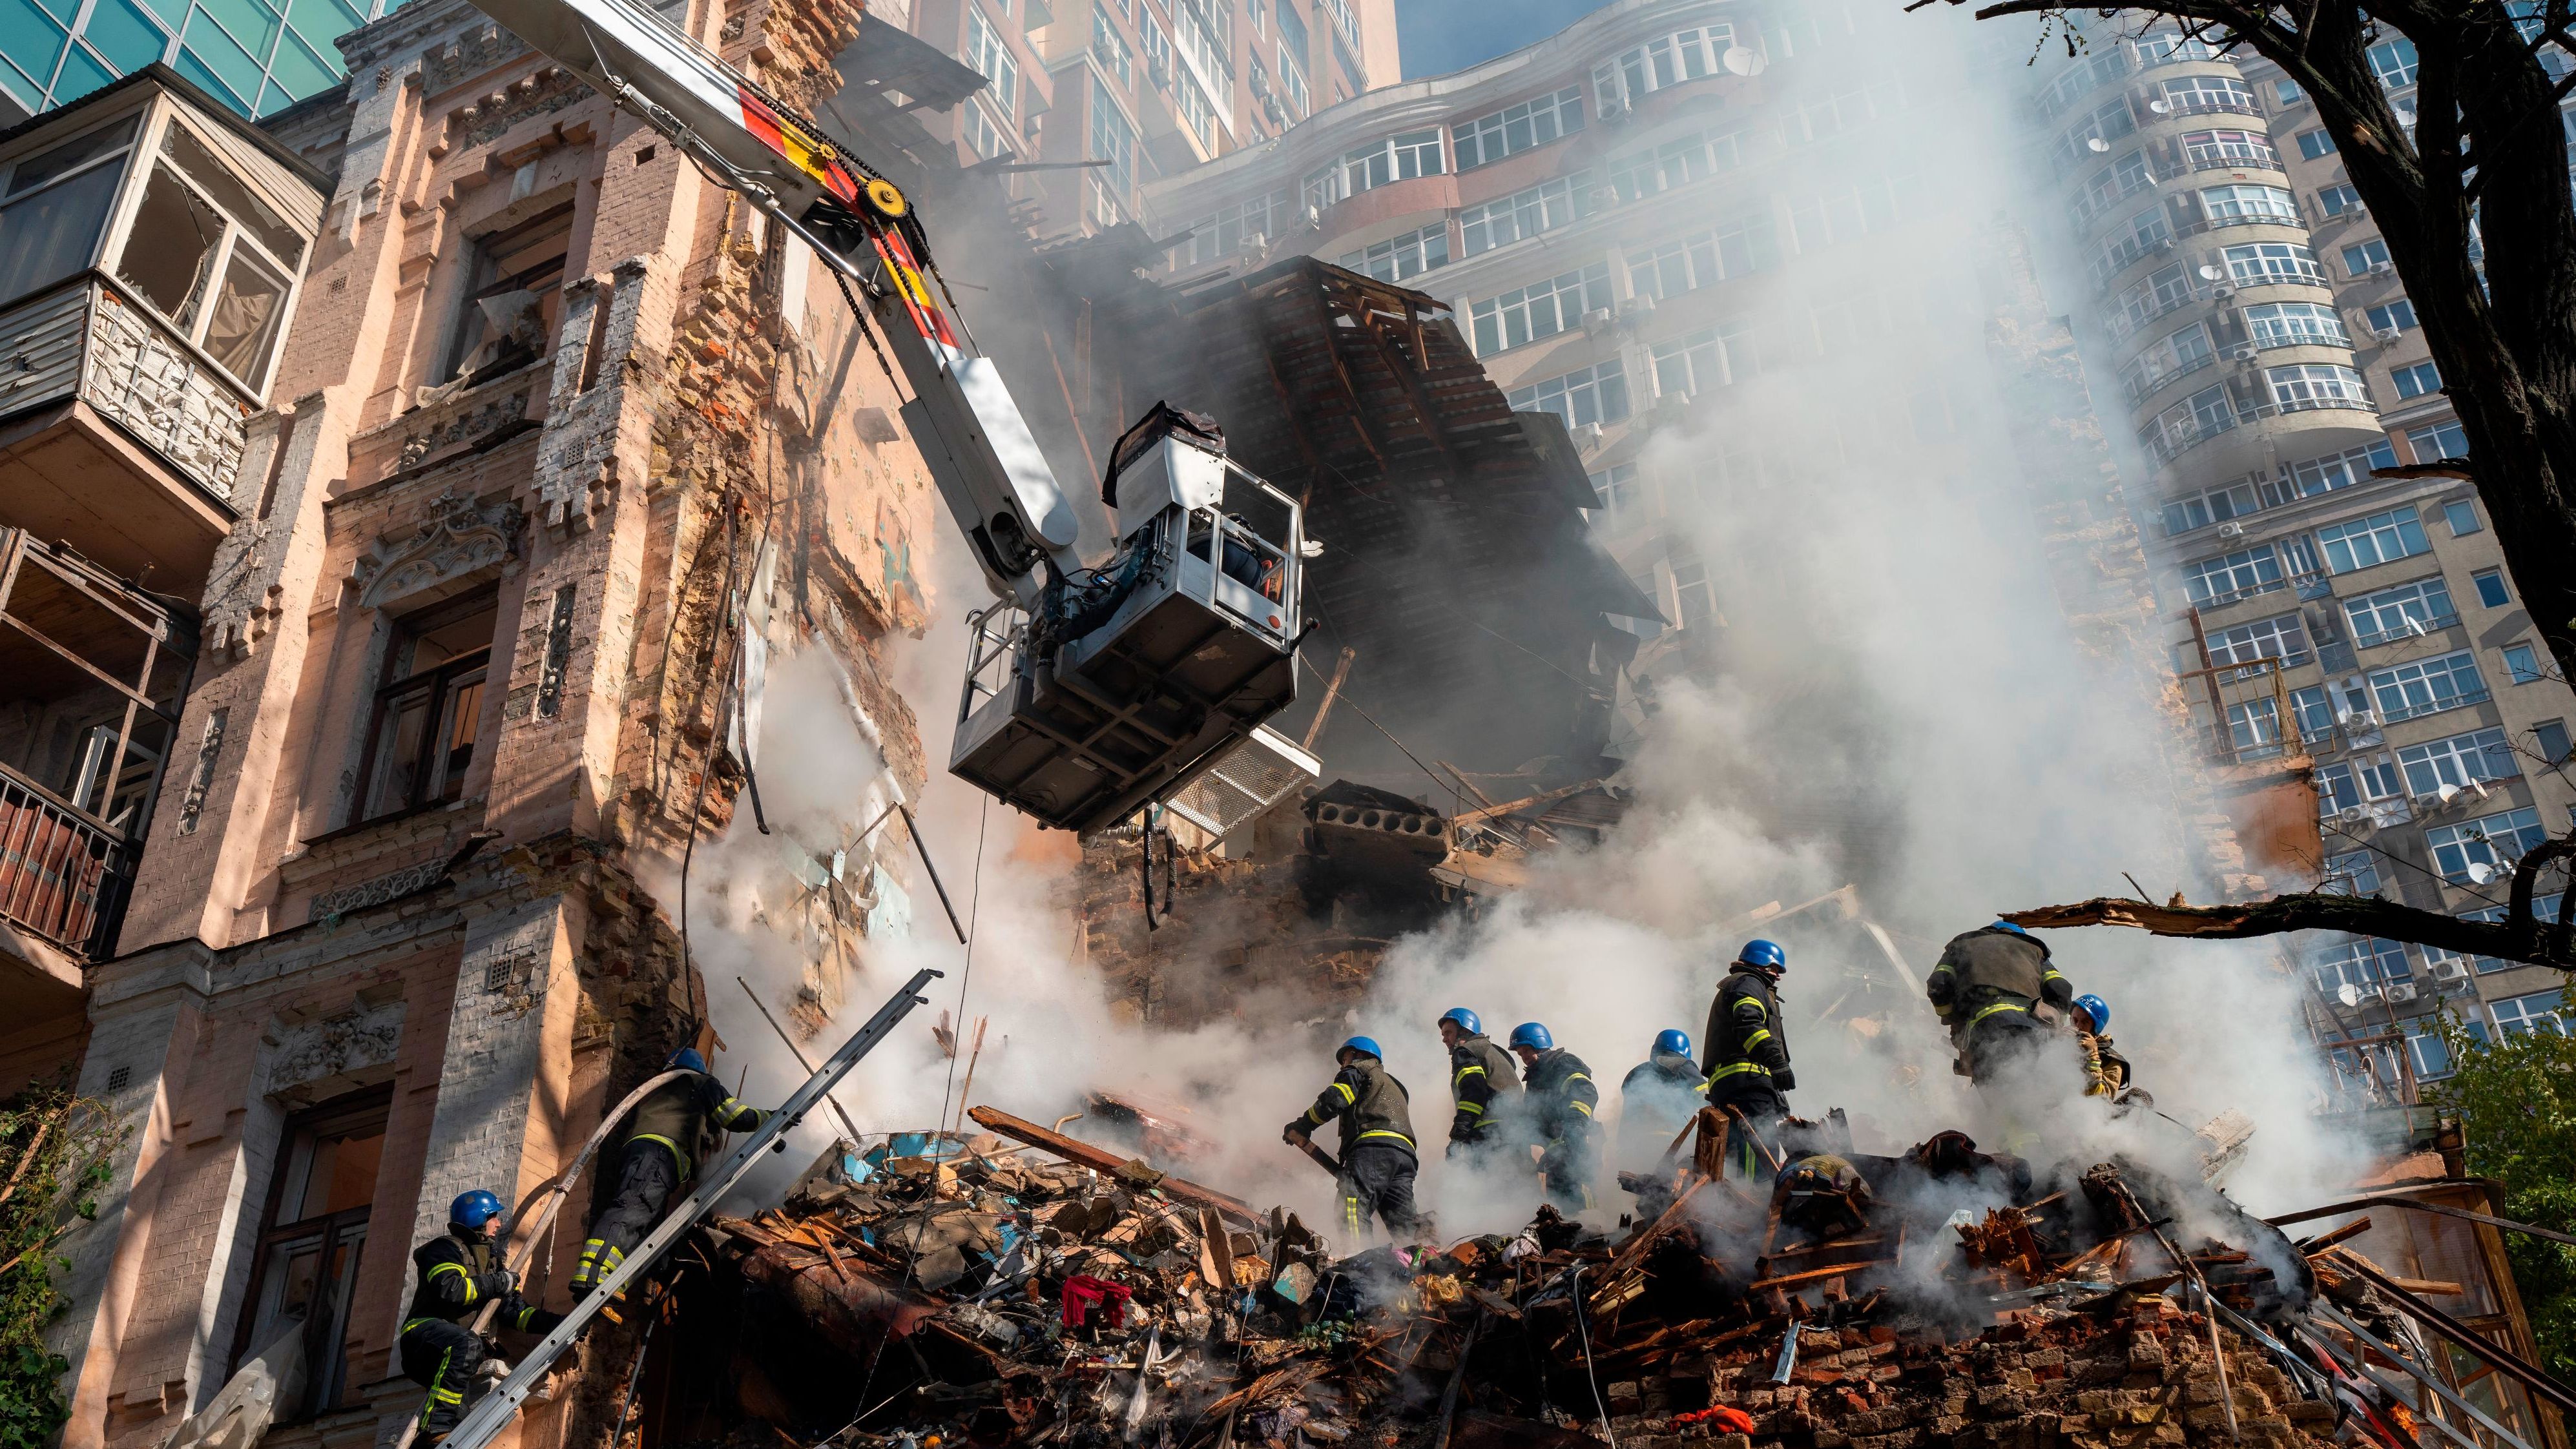 Firefighters work after a drone attack on buildings in Kyiv on October 17, 2022.